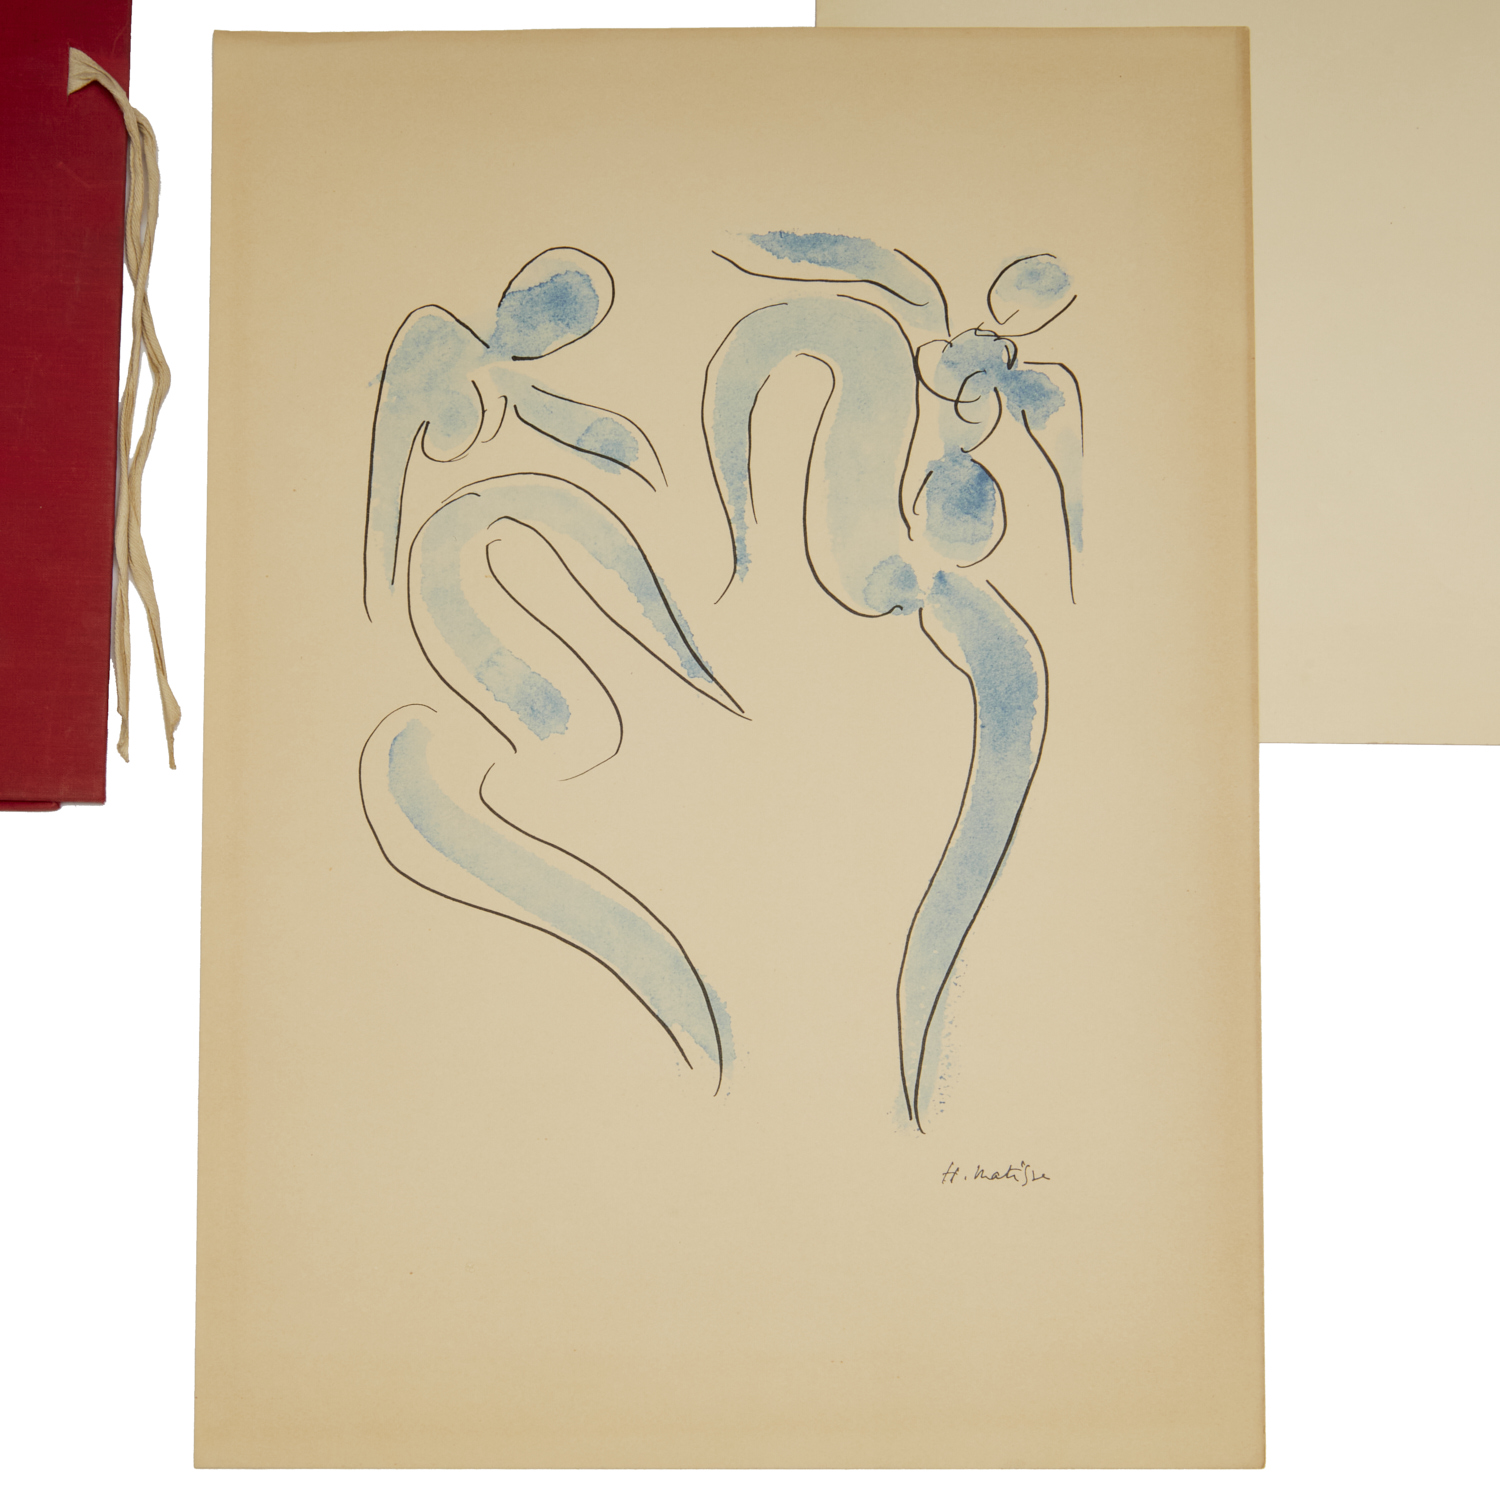 HENRI MATISSE, LITHOGRAPH WITH